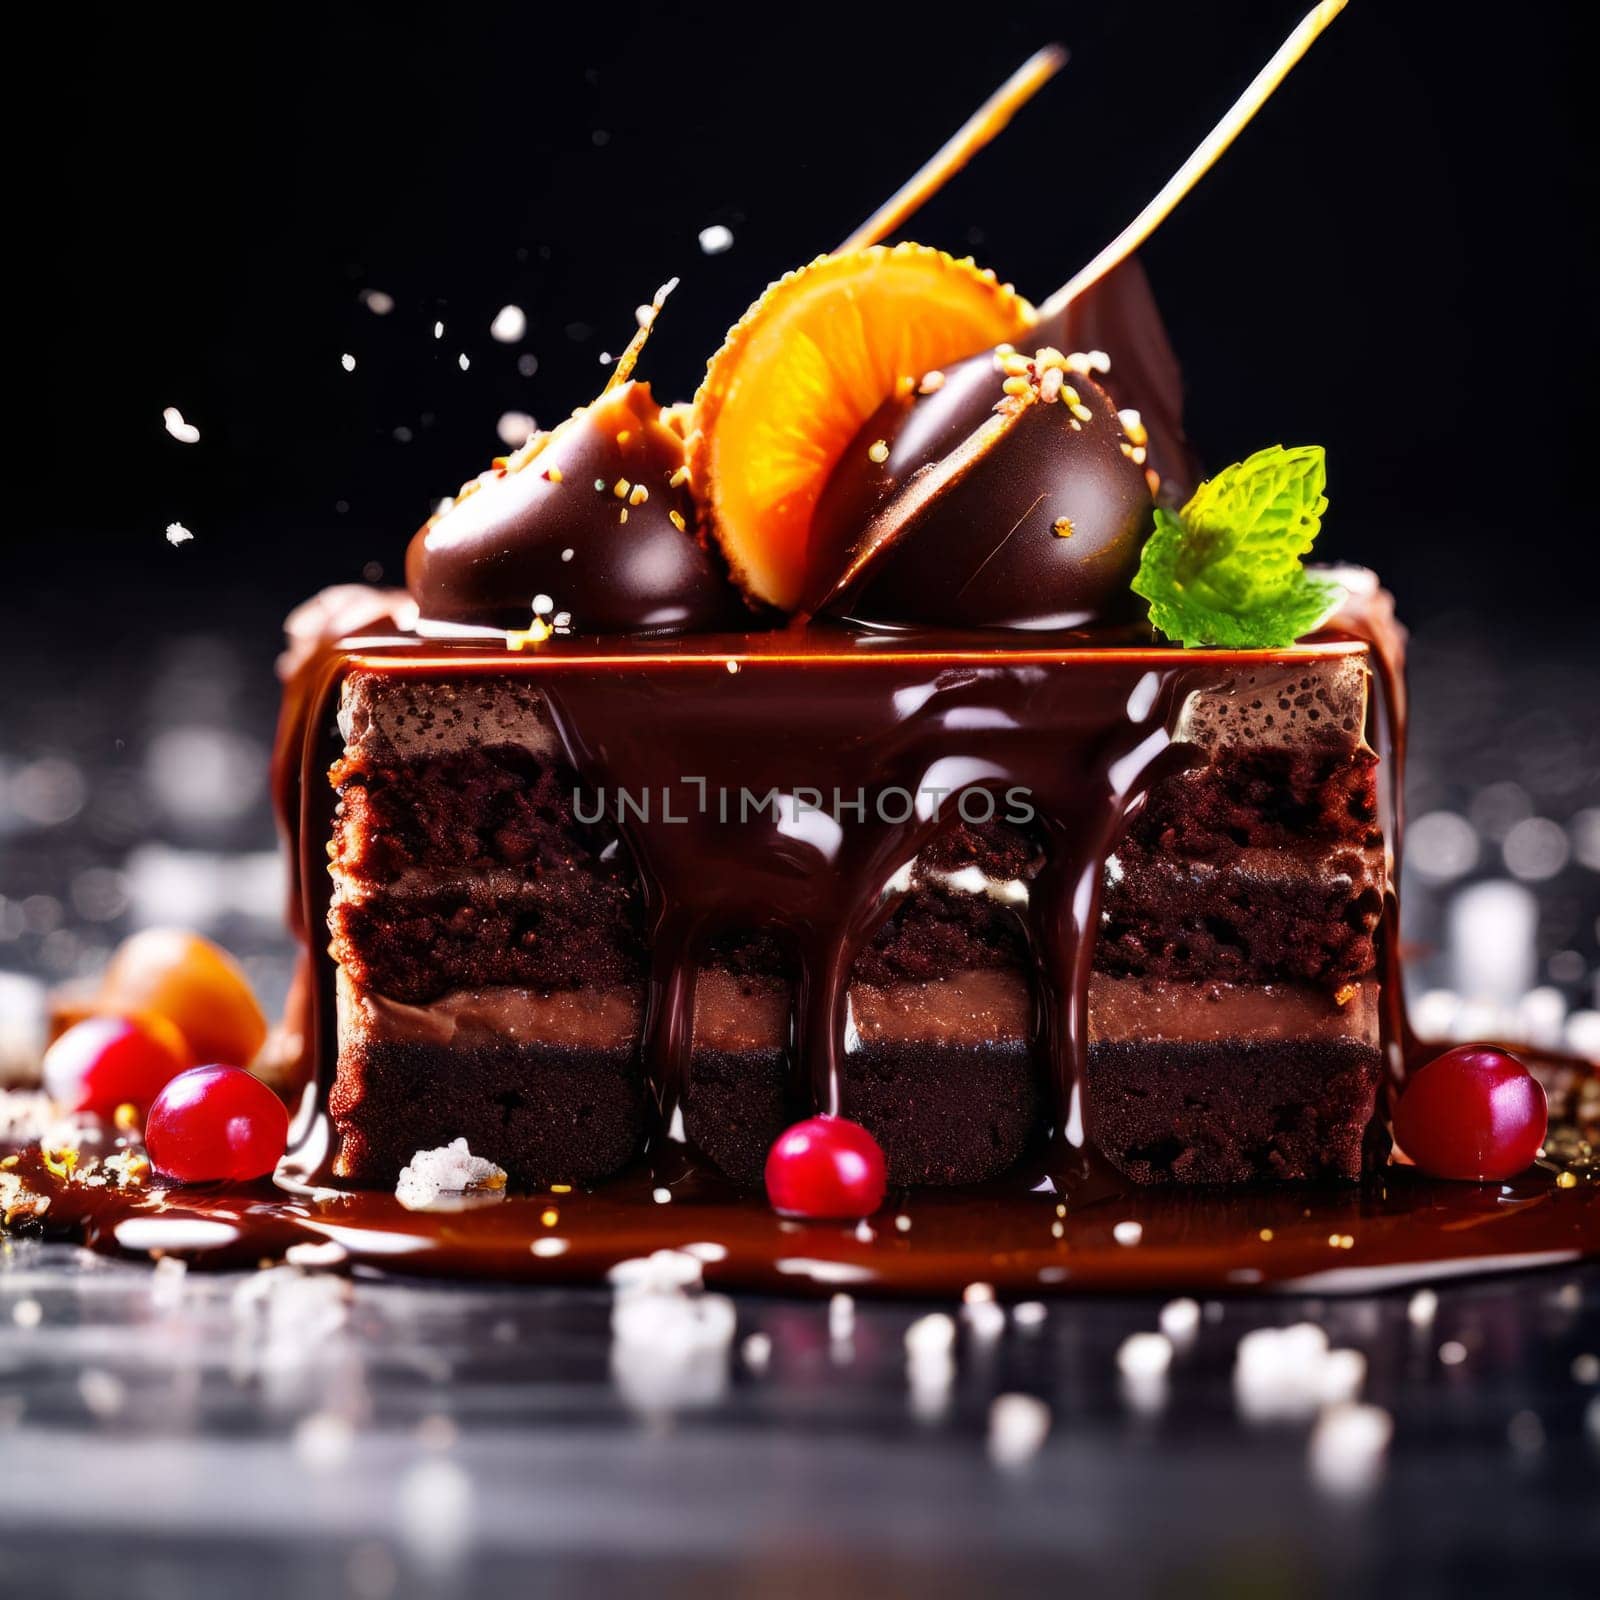 Decadent slice of chocolate cake topped with luscious cherries, drizzled with rich chocolate sauce. For dessert recipes, cafe, restaurant menu, culinary book, recipe website, culinary blog. by Angelsmoon